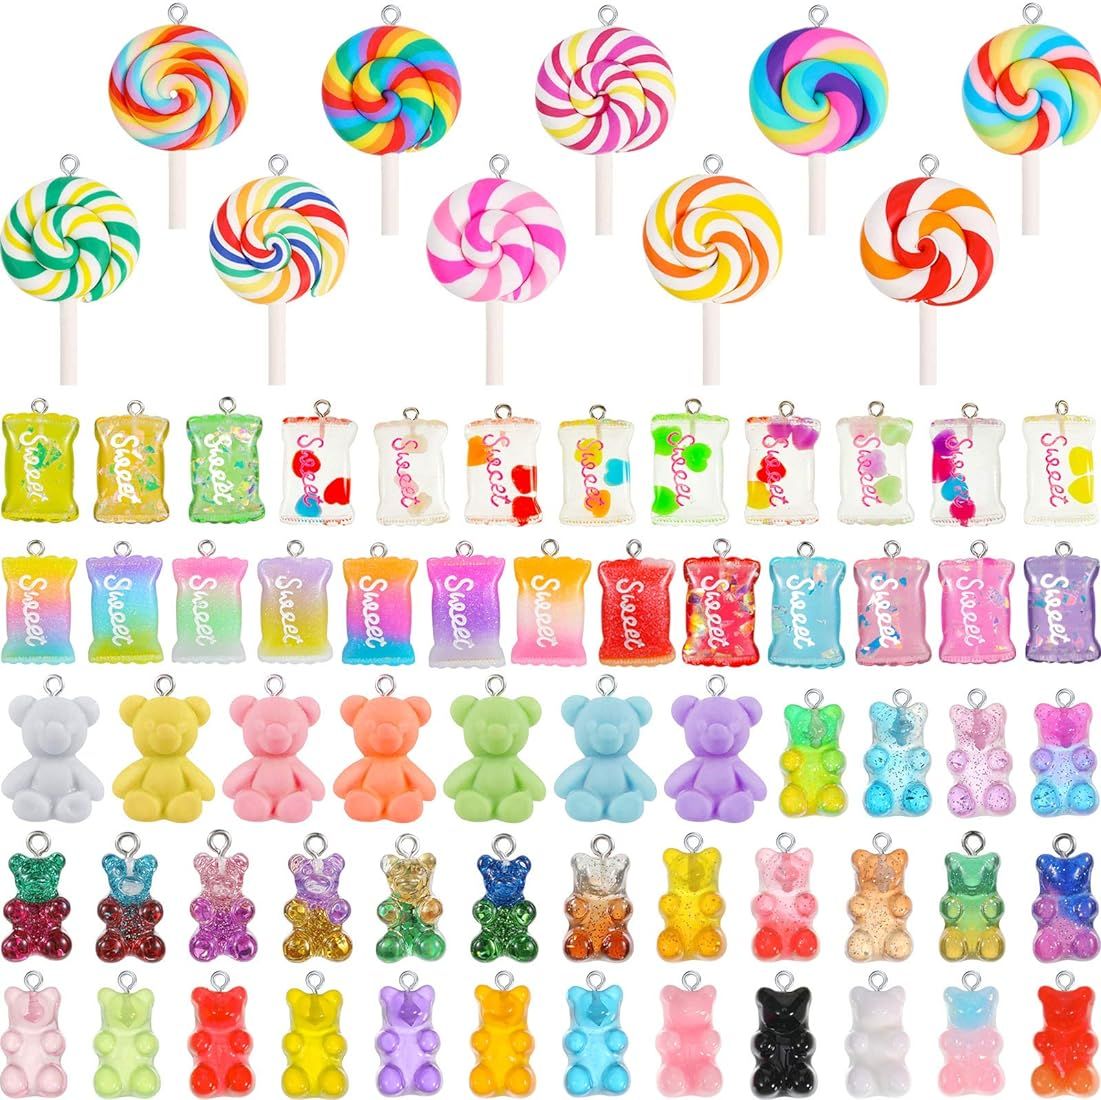 Hicarer 70 Pieces Colorful Candy Pendant Charm for Jewelry Making Cute Gummy Candy Bear Lollipops... | Amazon (US)